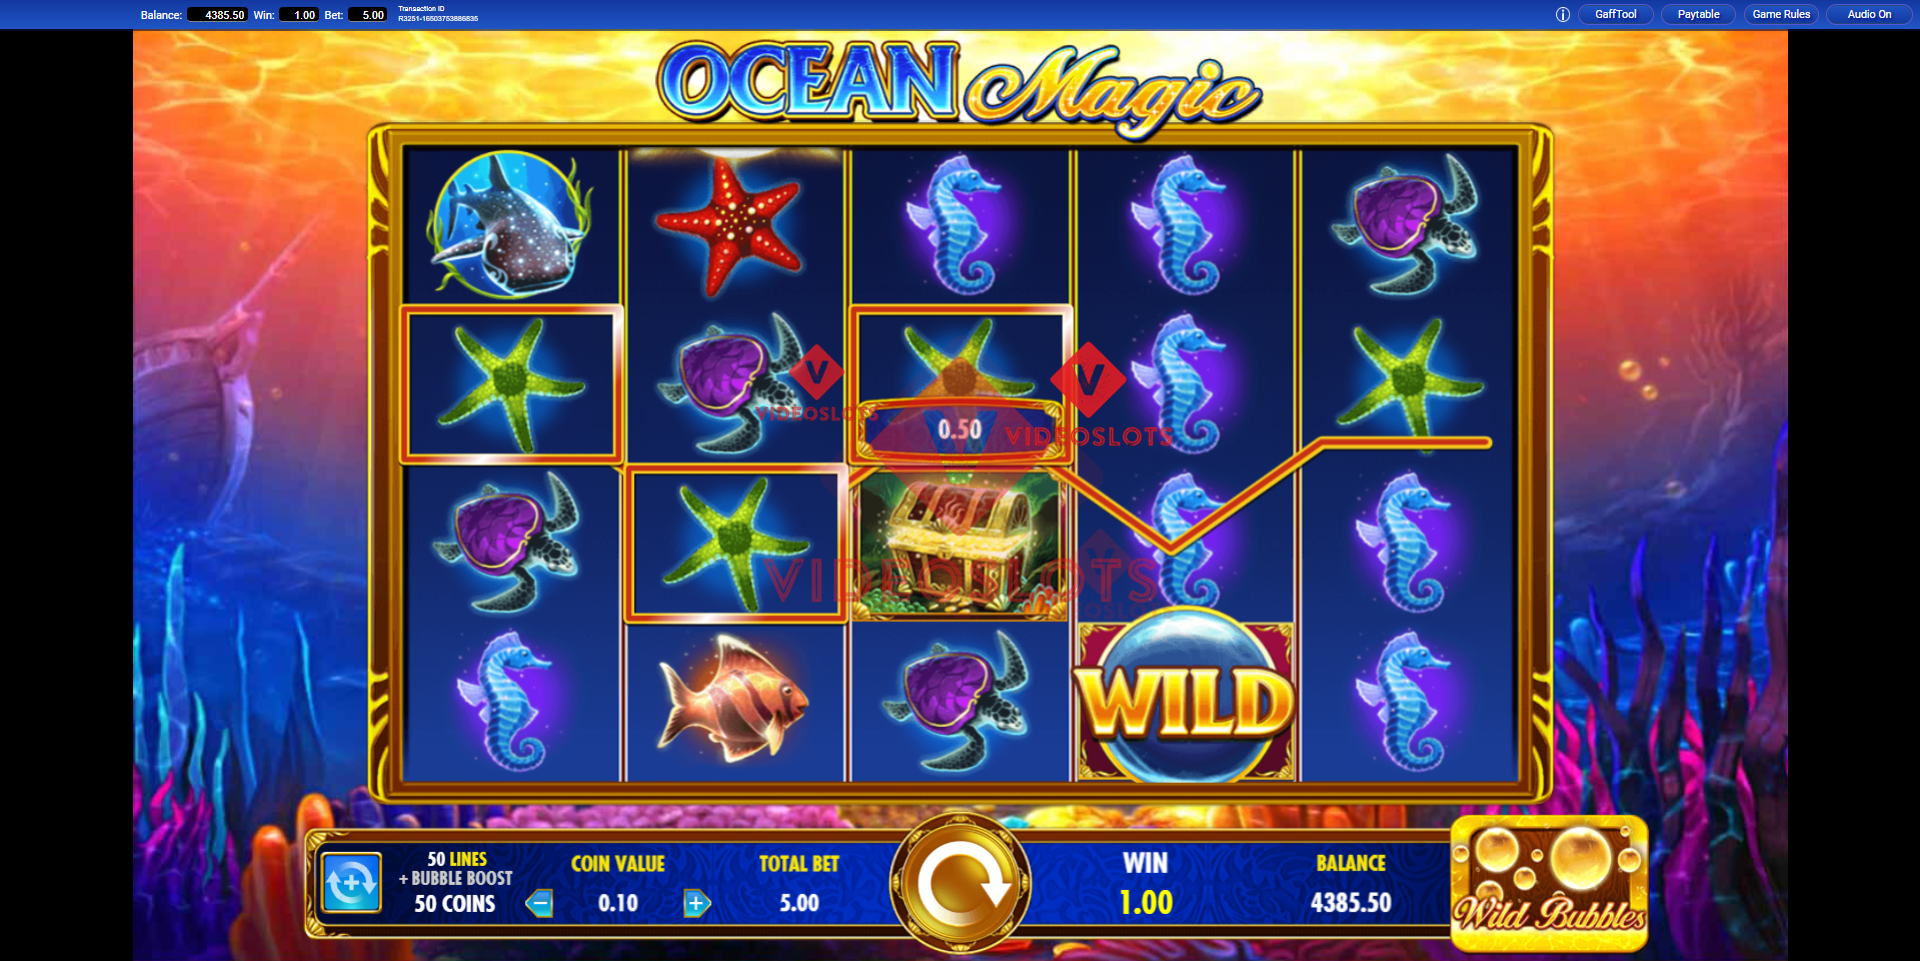 Base Game for Ocean Magic slot from IGT